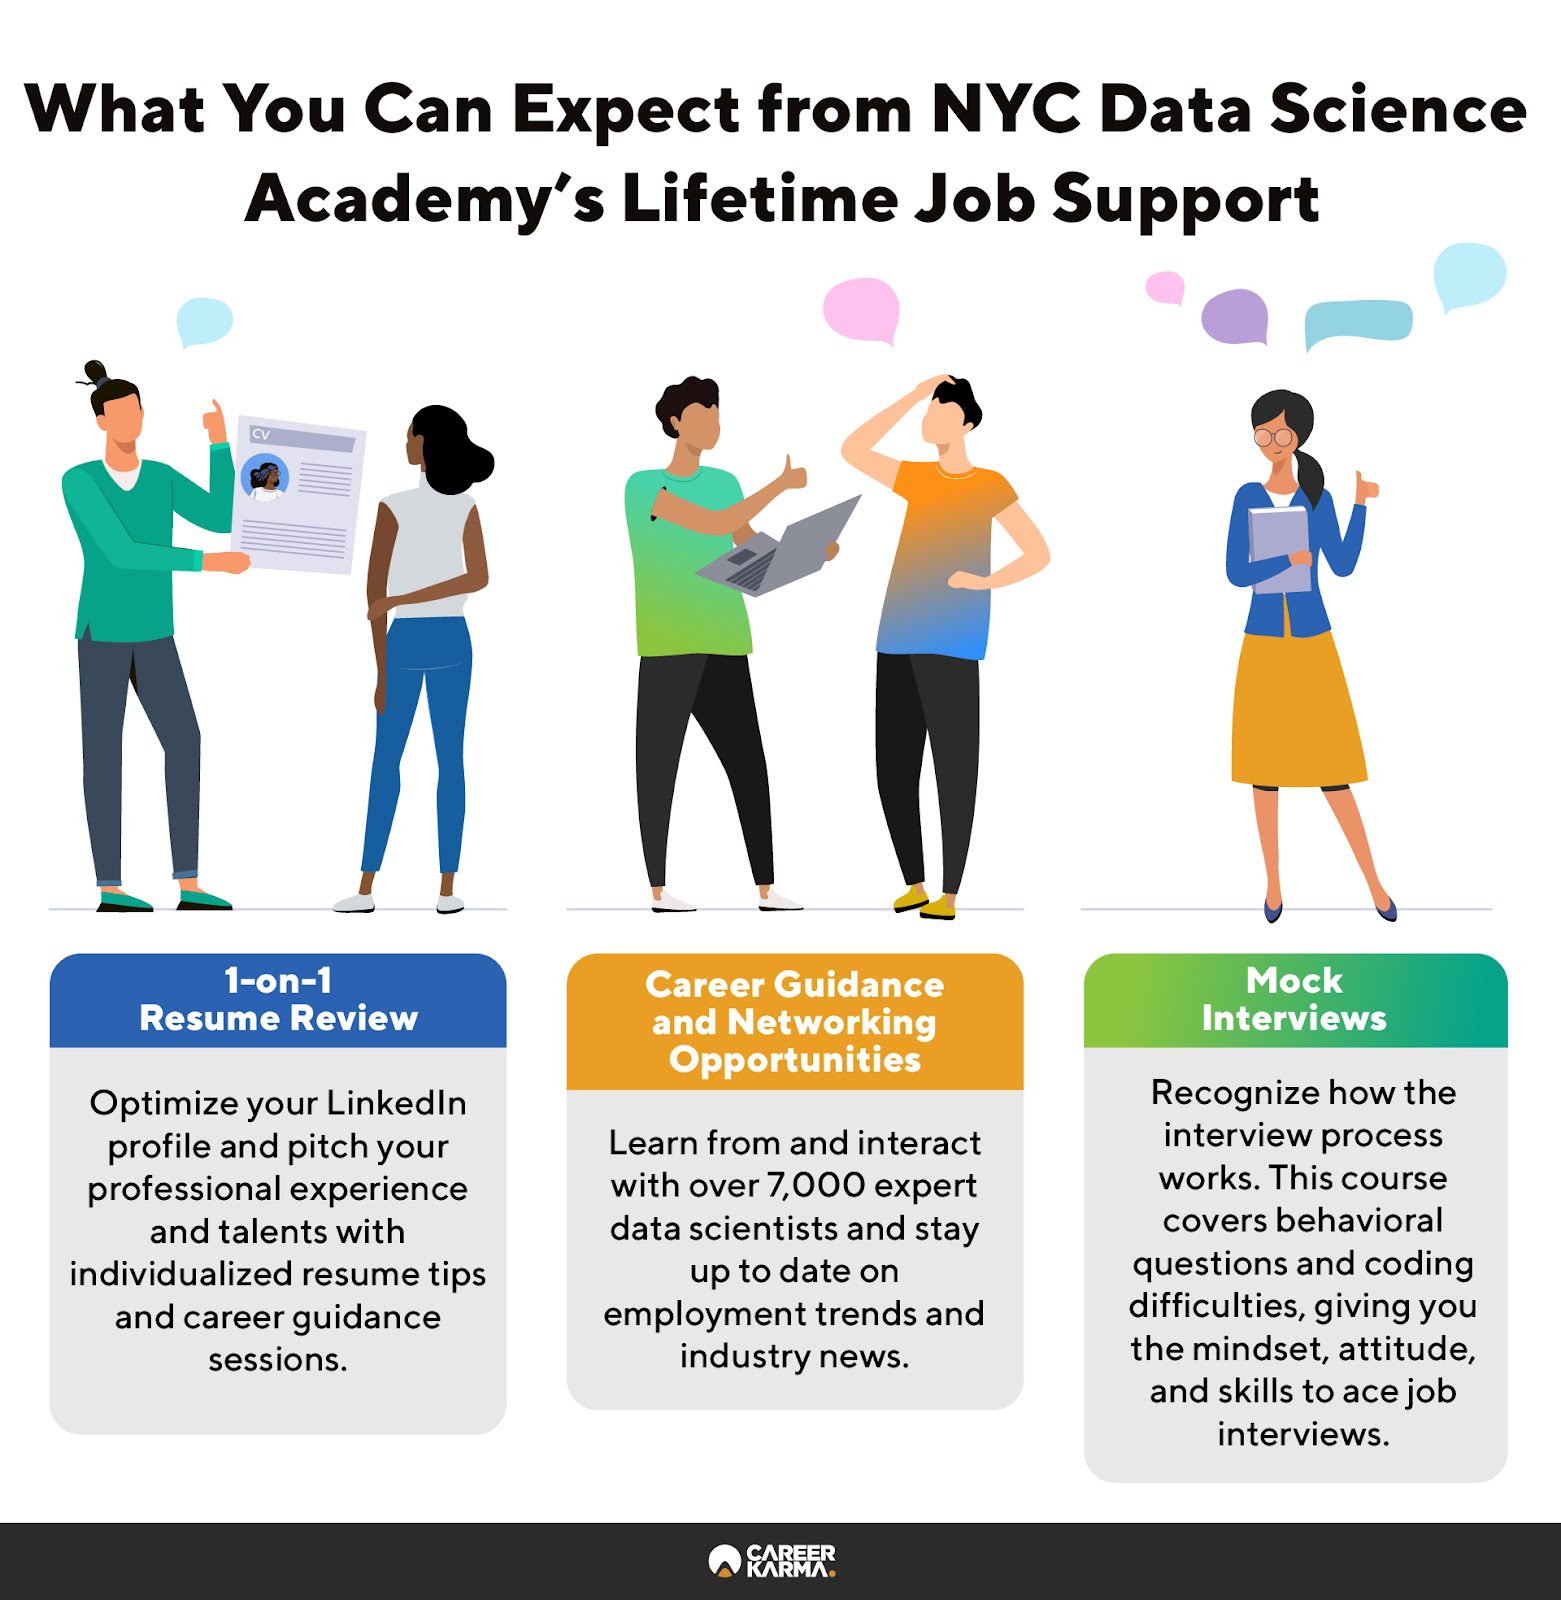 An infographic covering NYC Data Science Academy’s lifetime career services